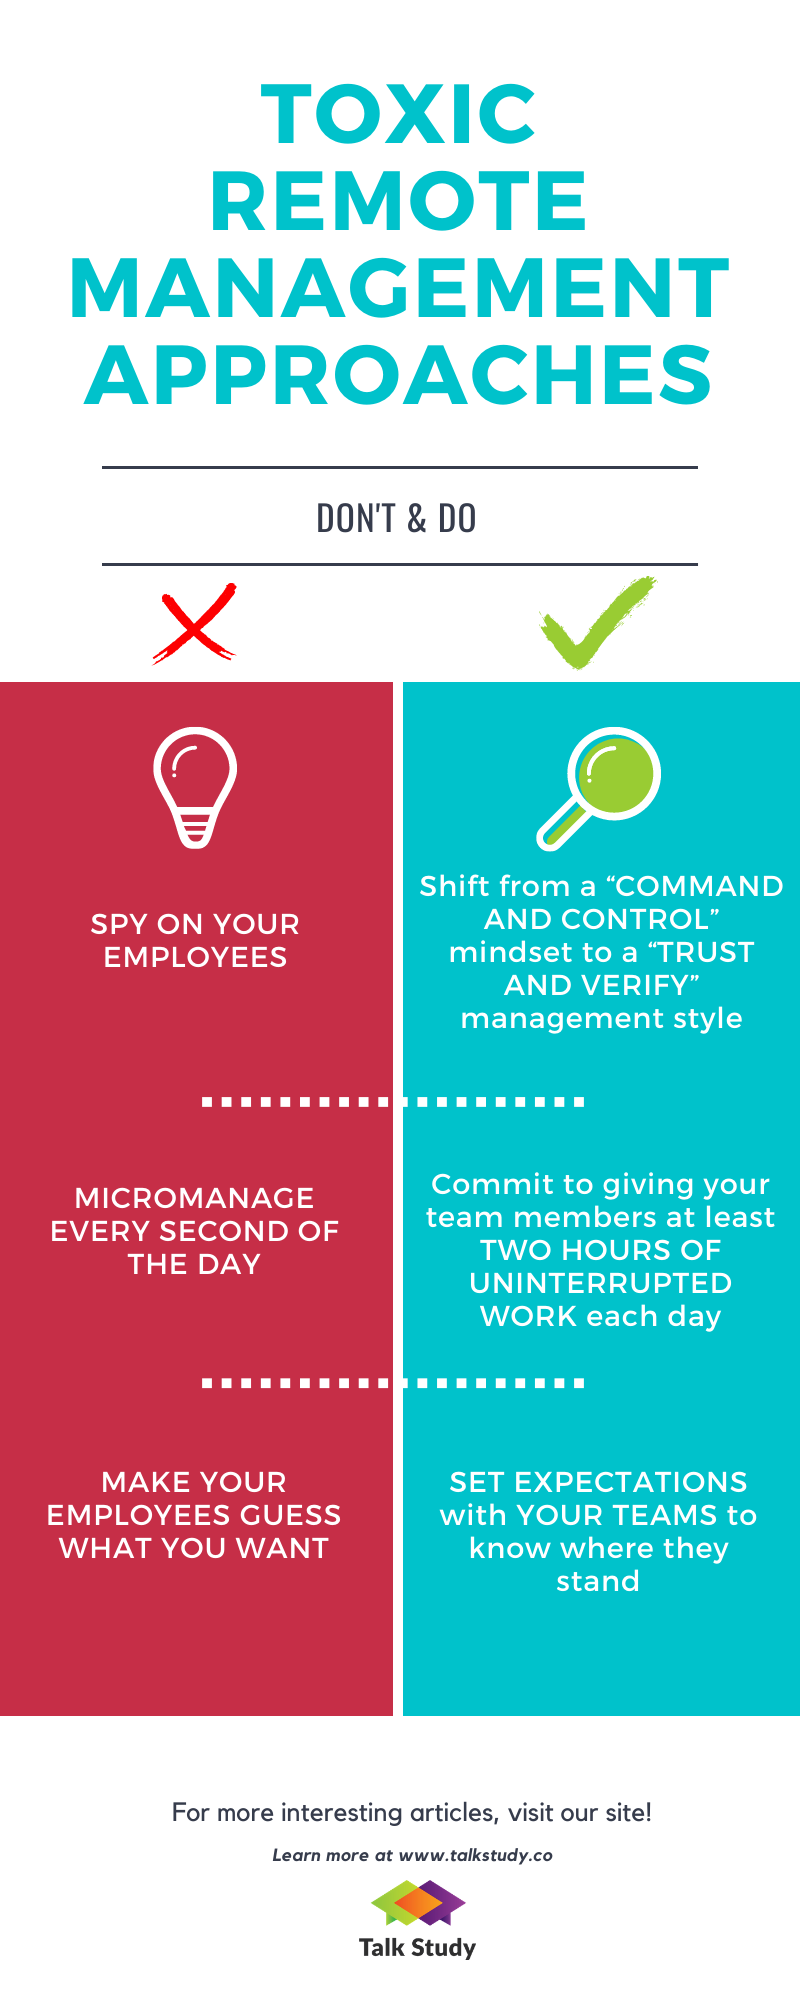 toxic remote management approaches infographic